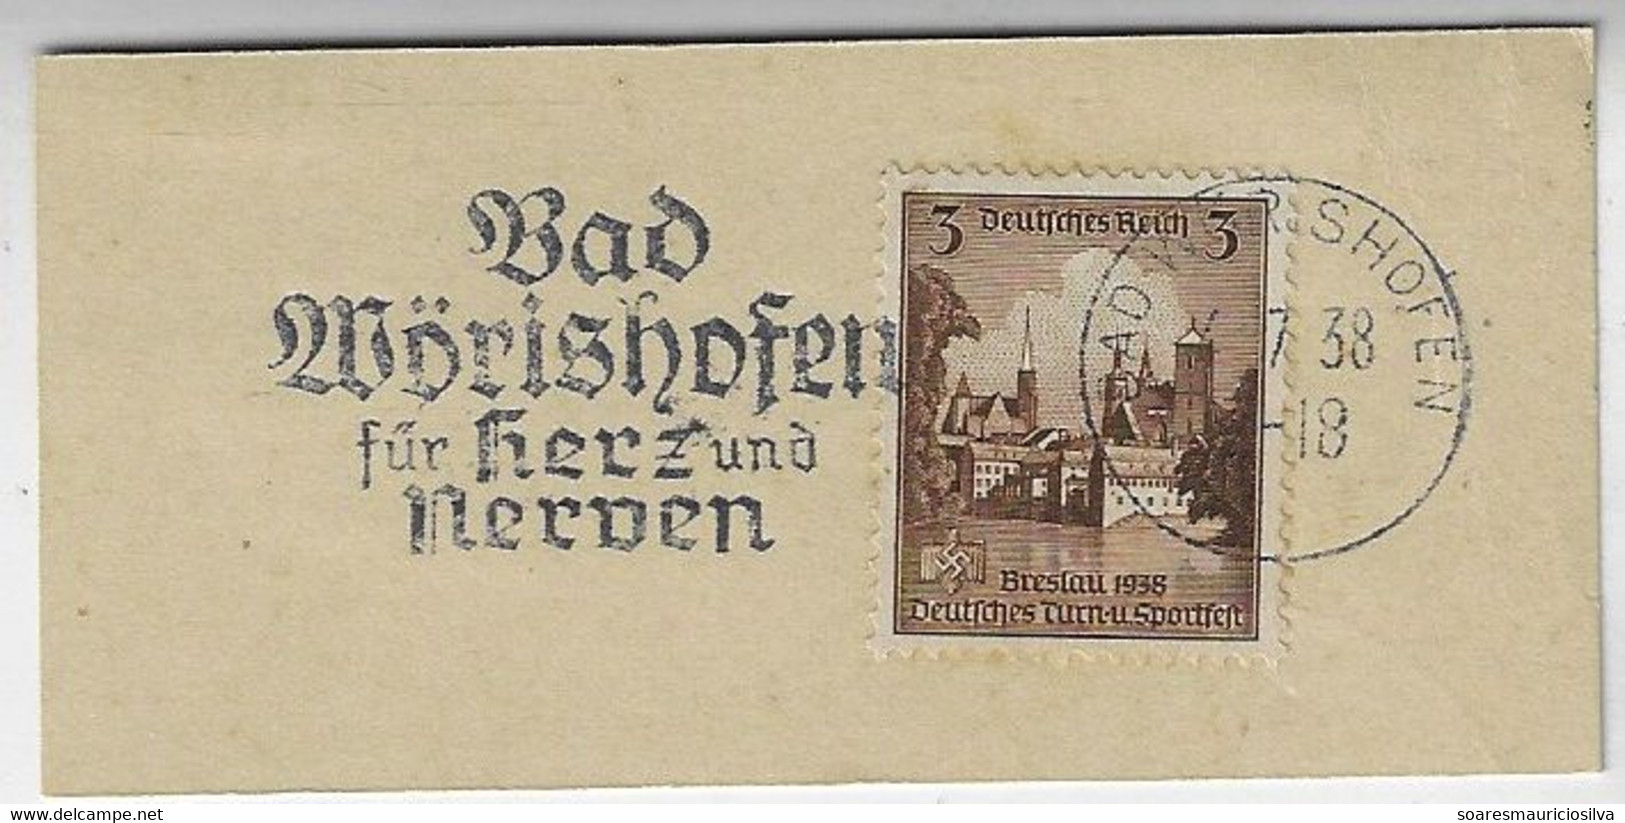 Germany 1938 Fragment Stamp Breslau 3 Pf Slogan Cancel "Bad Wörishofen for Heart And Nerves" Hydrotherapy Health - Thermalisme